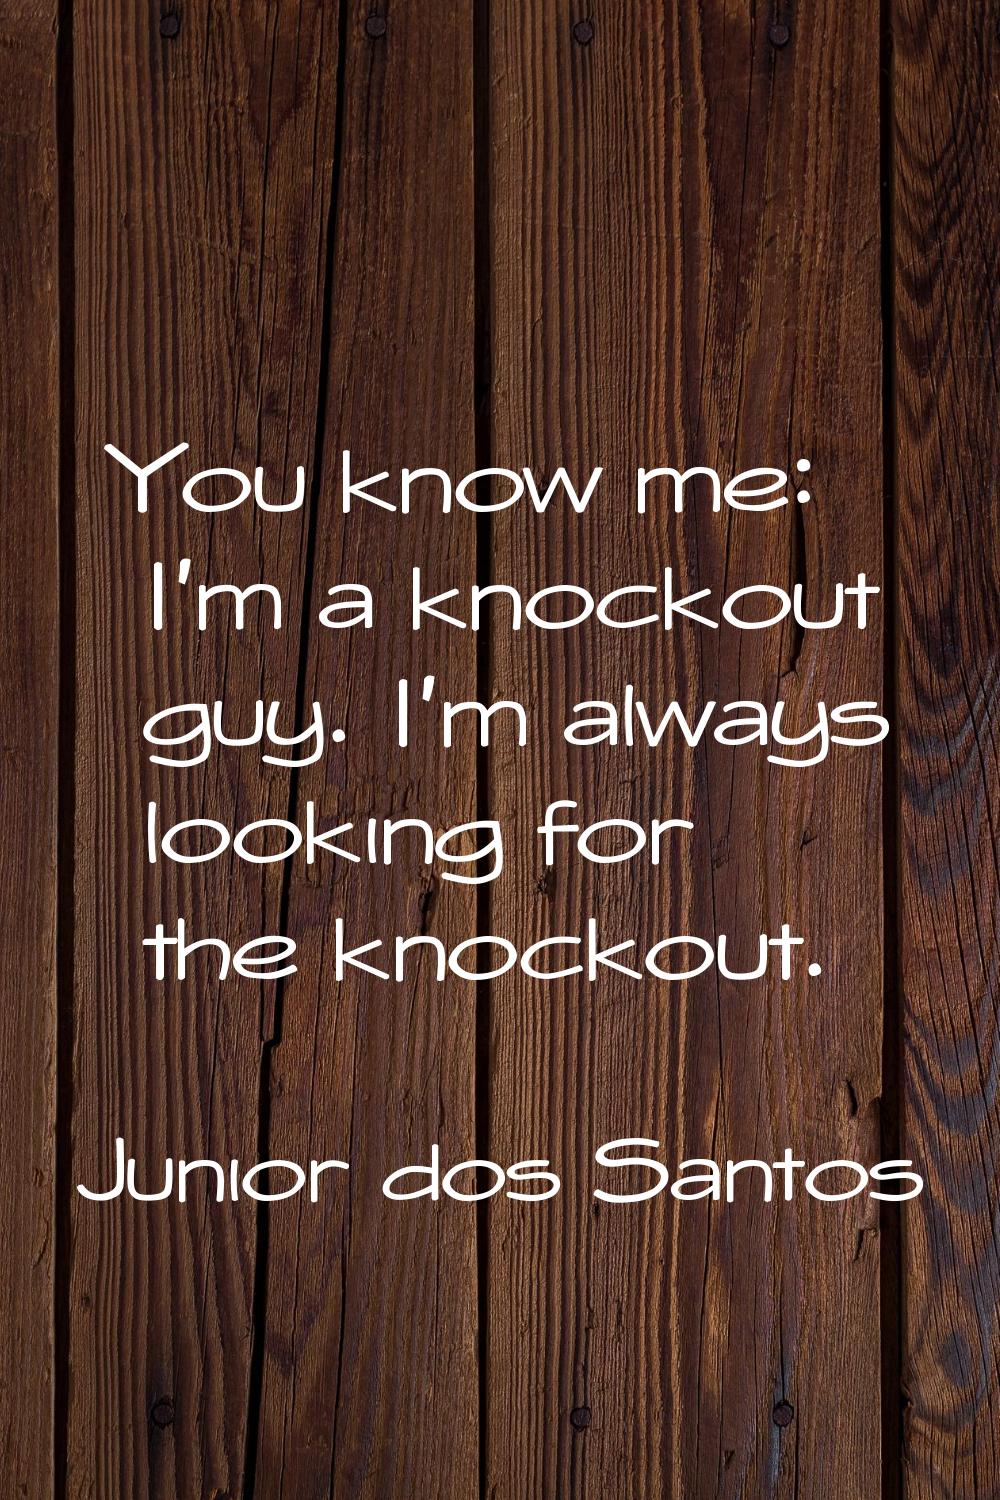 You know me: I'm a knockout guy. I'm always looking for the knockout.